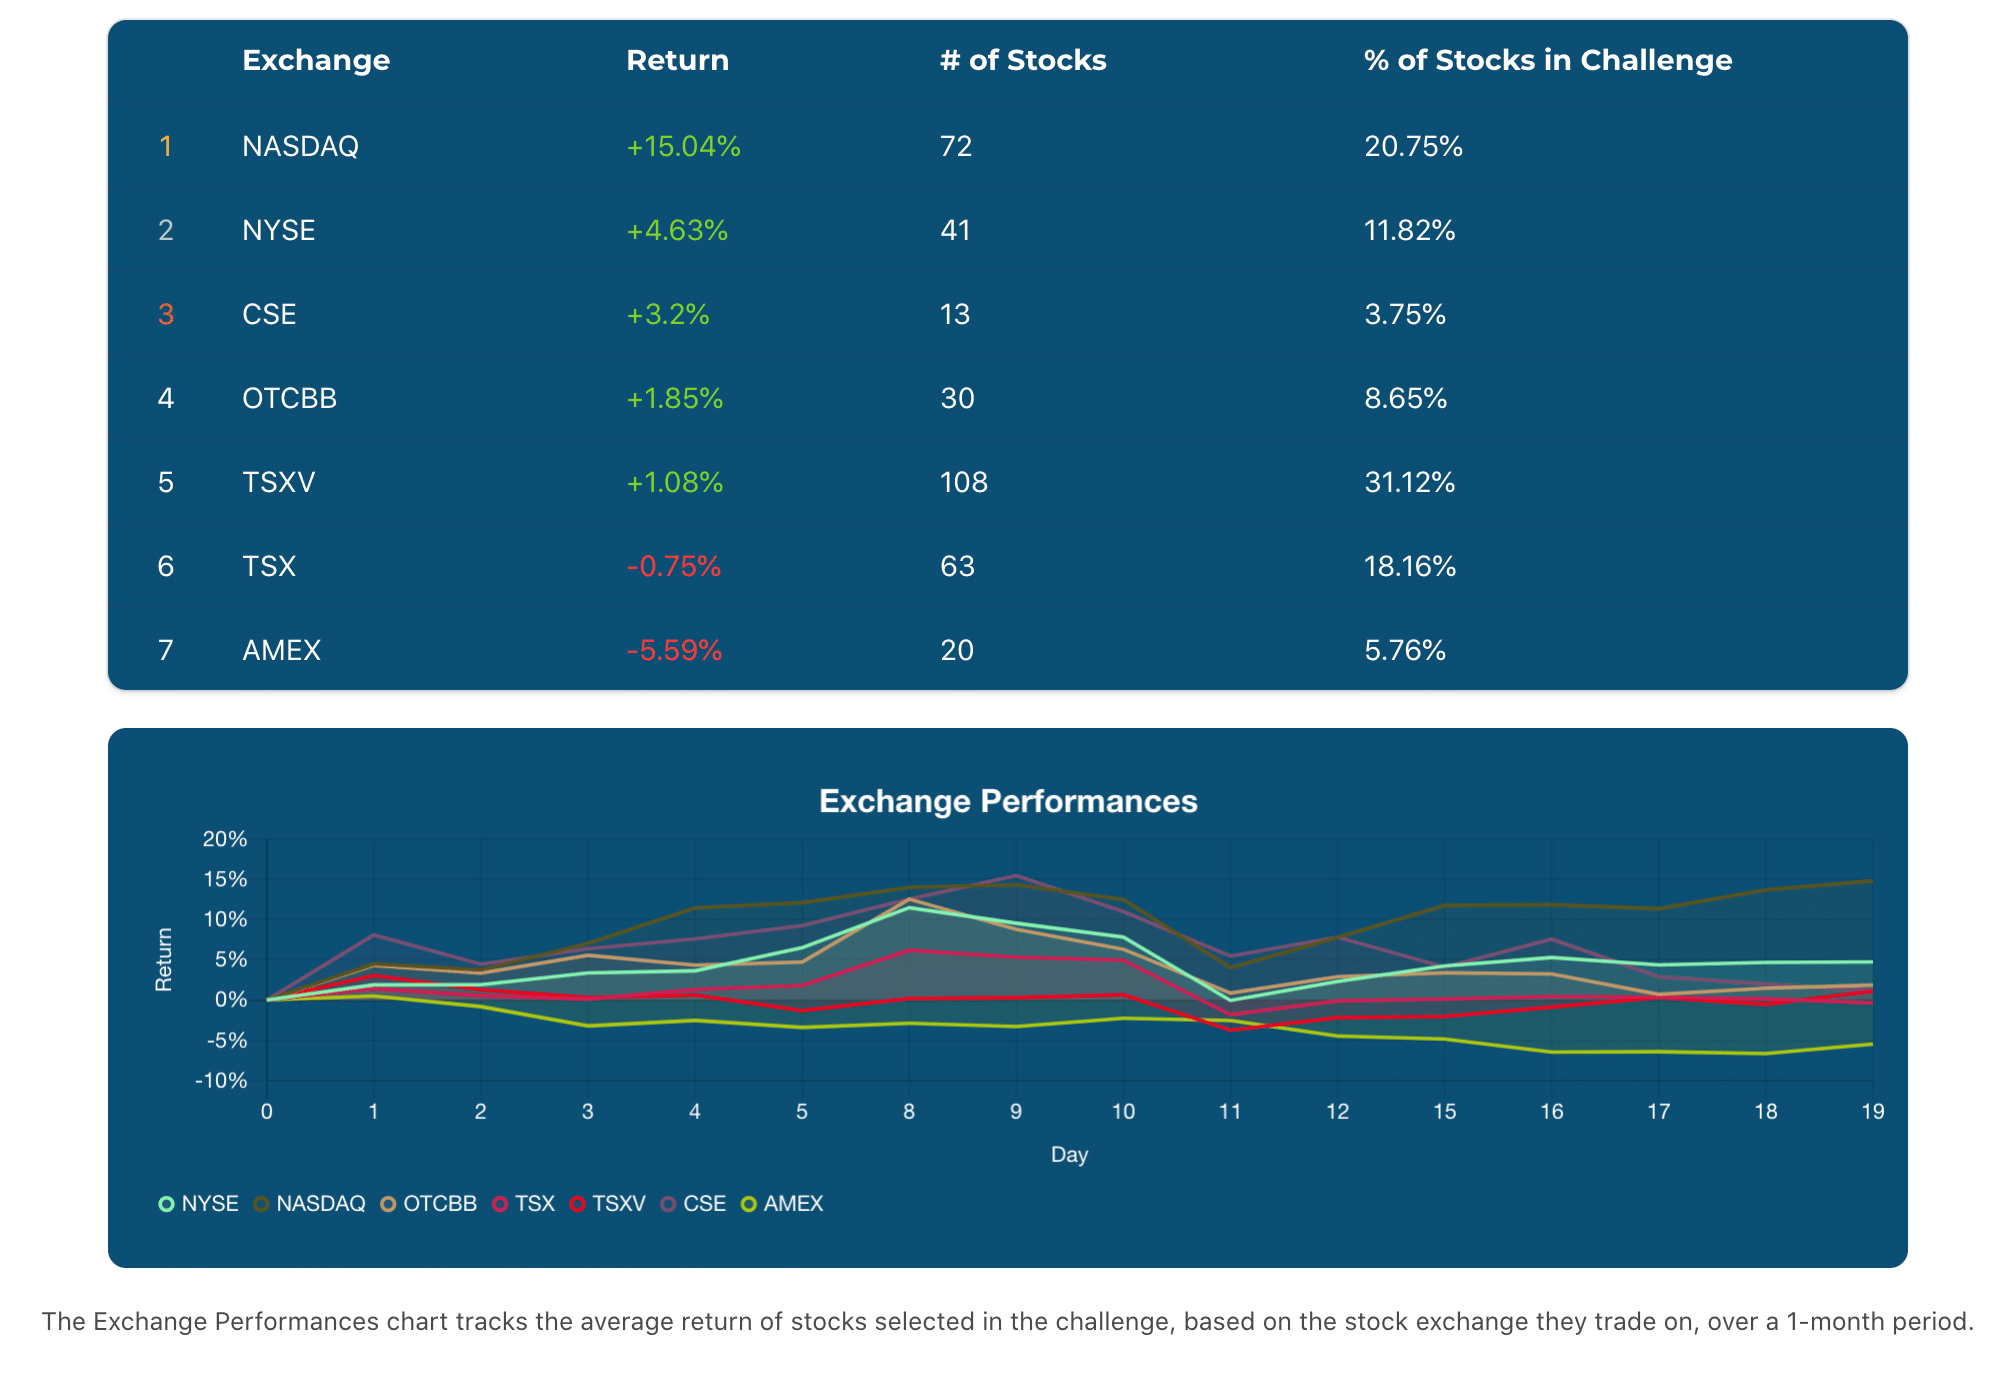 exchange performances chart for week 3 of the June 2020 Stock Challenge